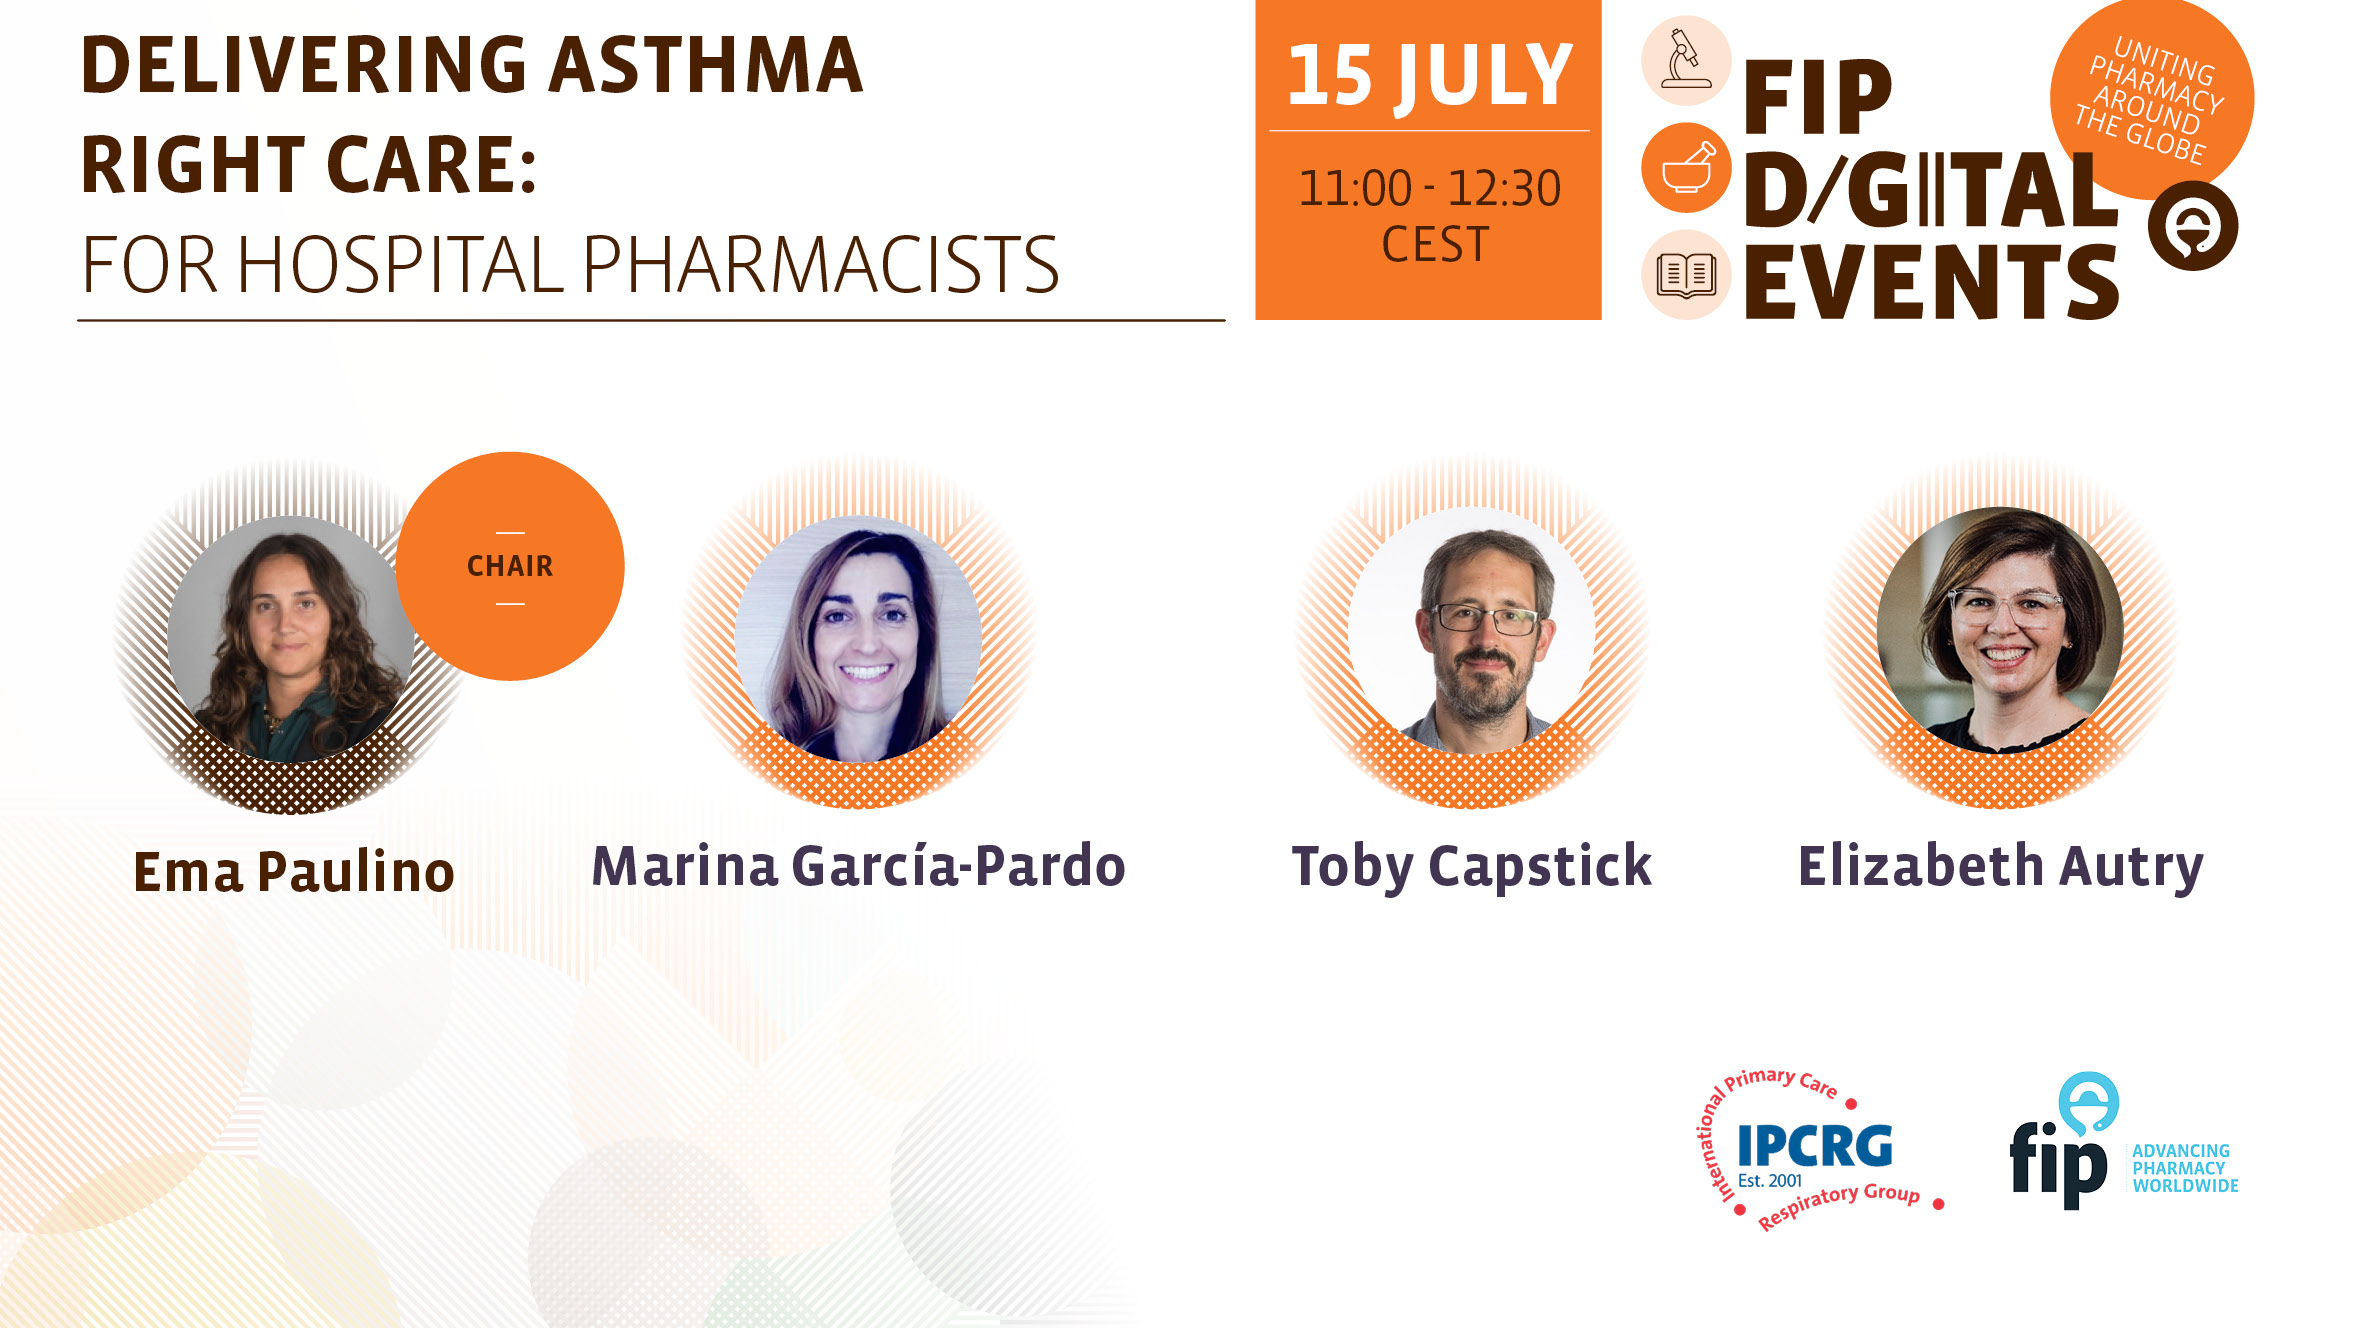 Delivering asthma right care: For hospital pharmacists Thumbnail